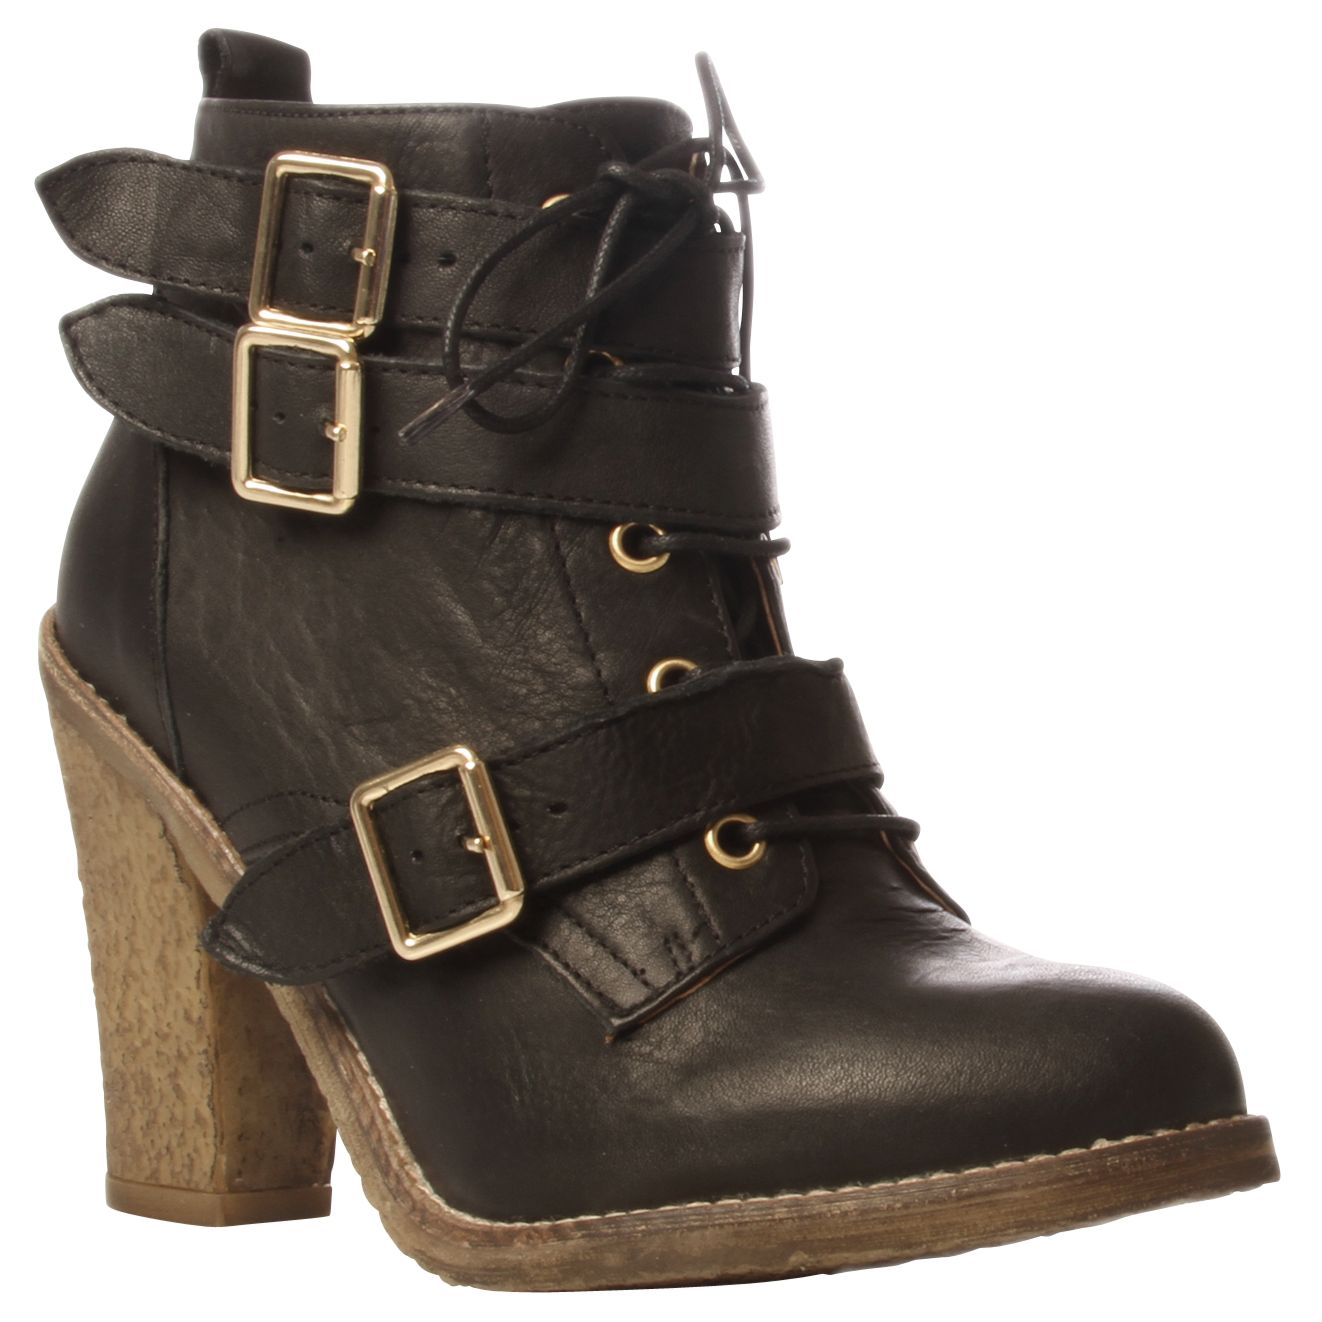 KG by Kurt Geiger Victor Lace Up Buckle Ankle Boots, Black at John Lewis